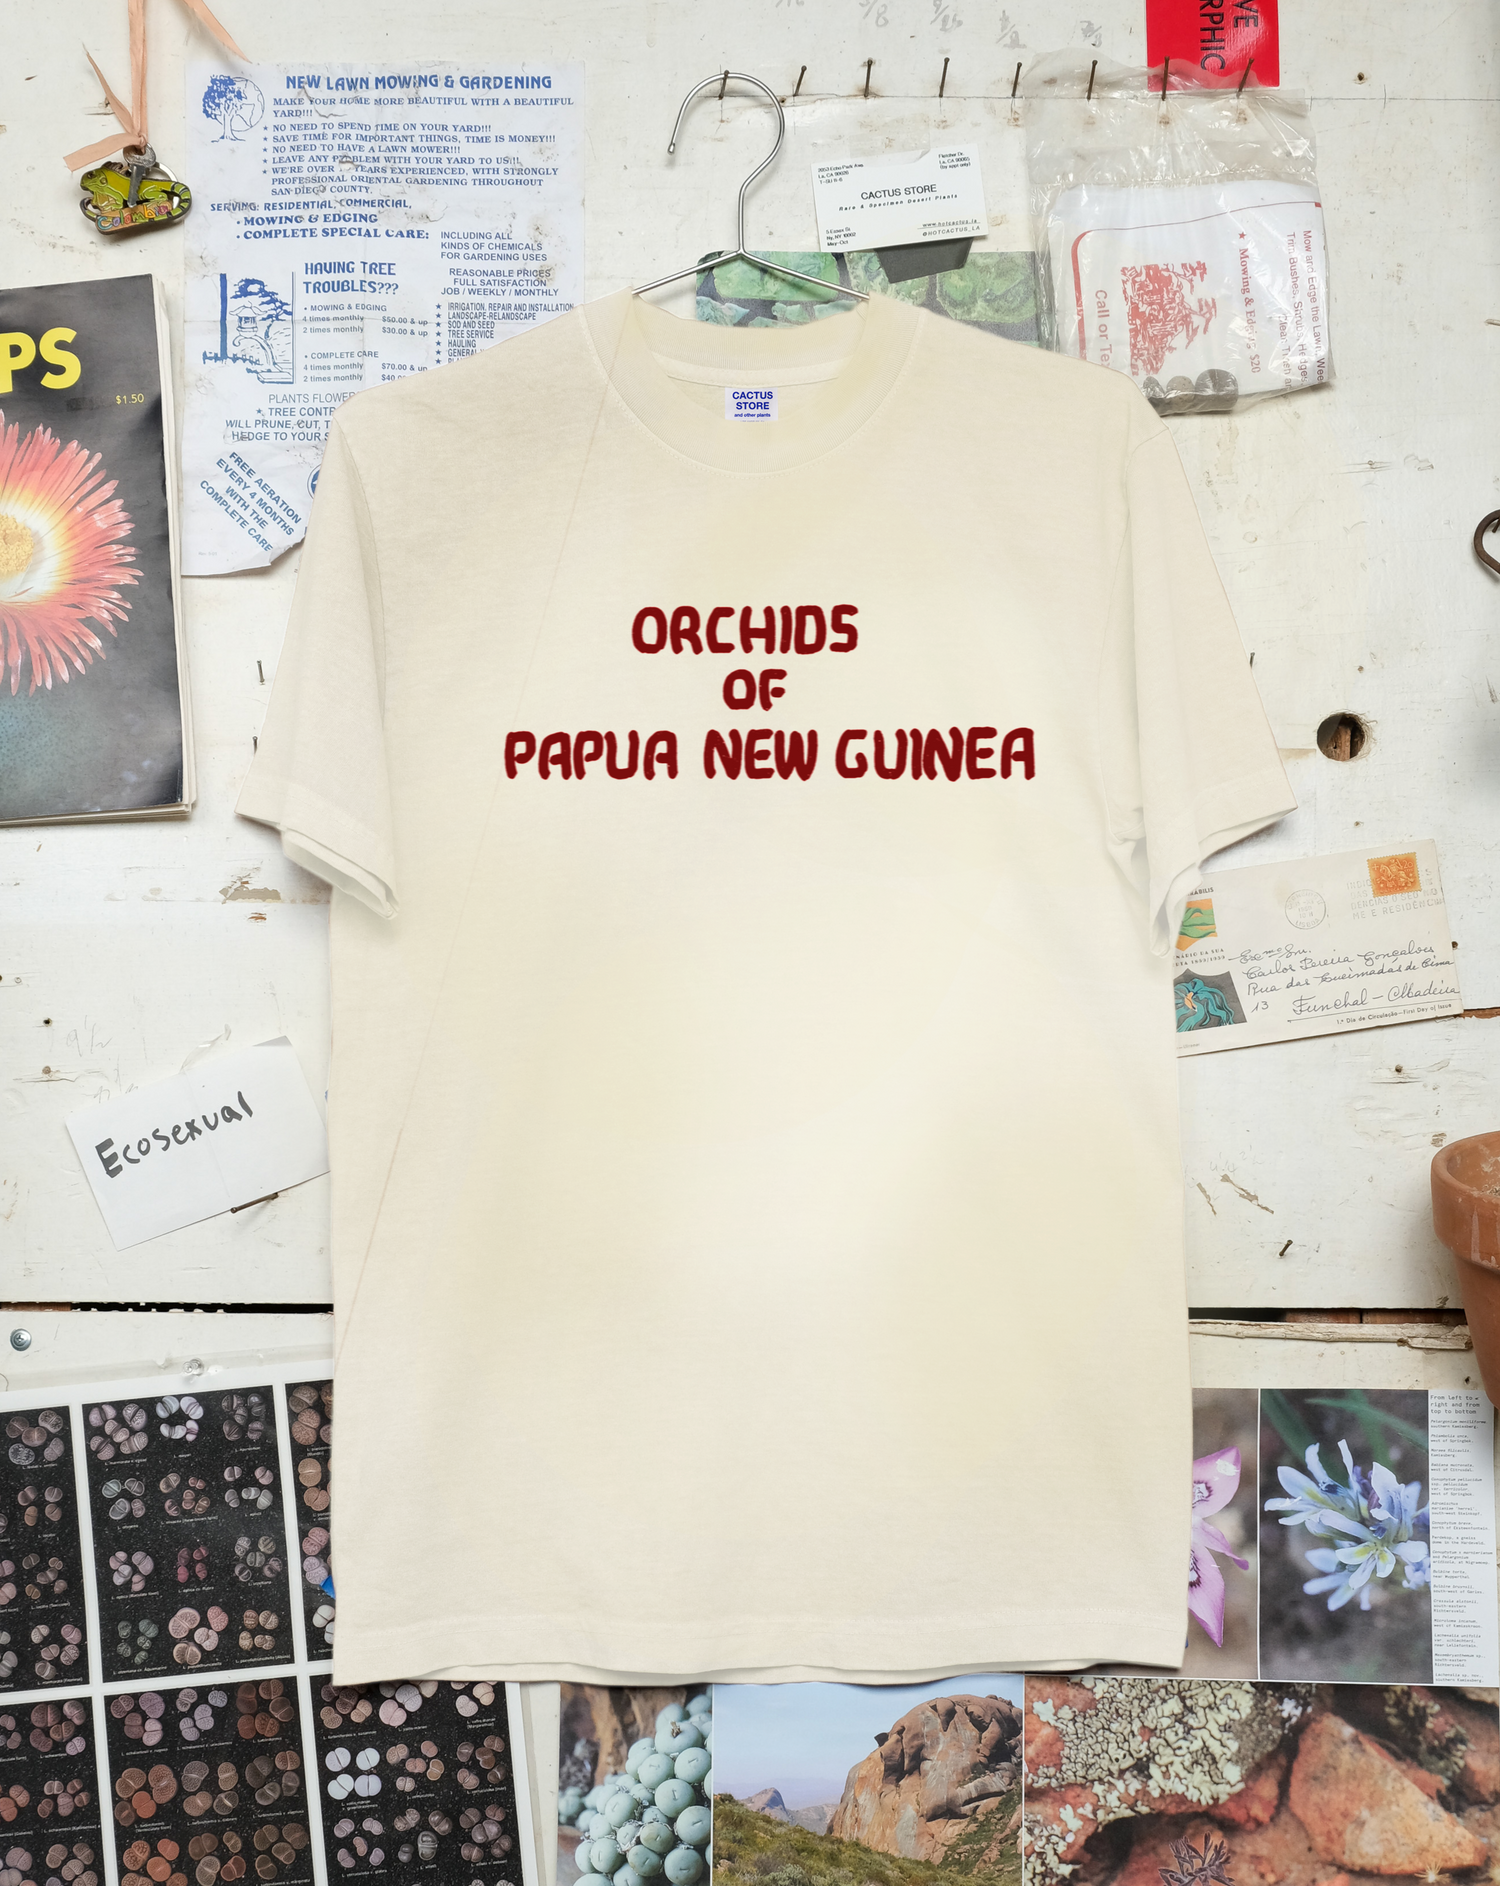 Orchids of Papau New Guinea T-Shirt